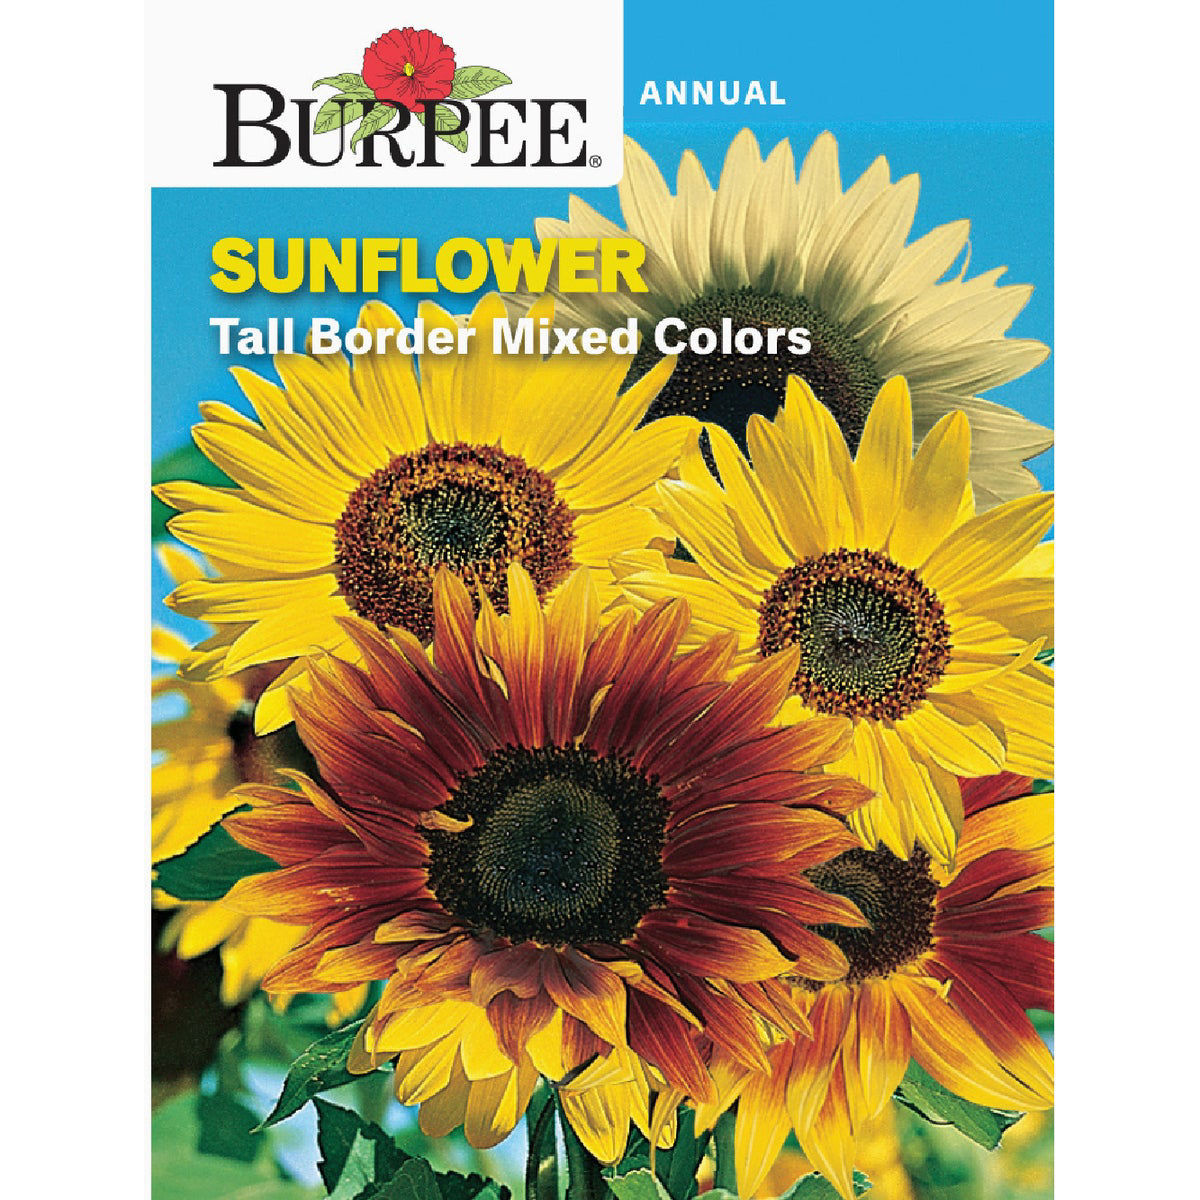 Burpee Sunflower Tall Border Mixed Colors Seed Packet | Do it Best